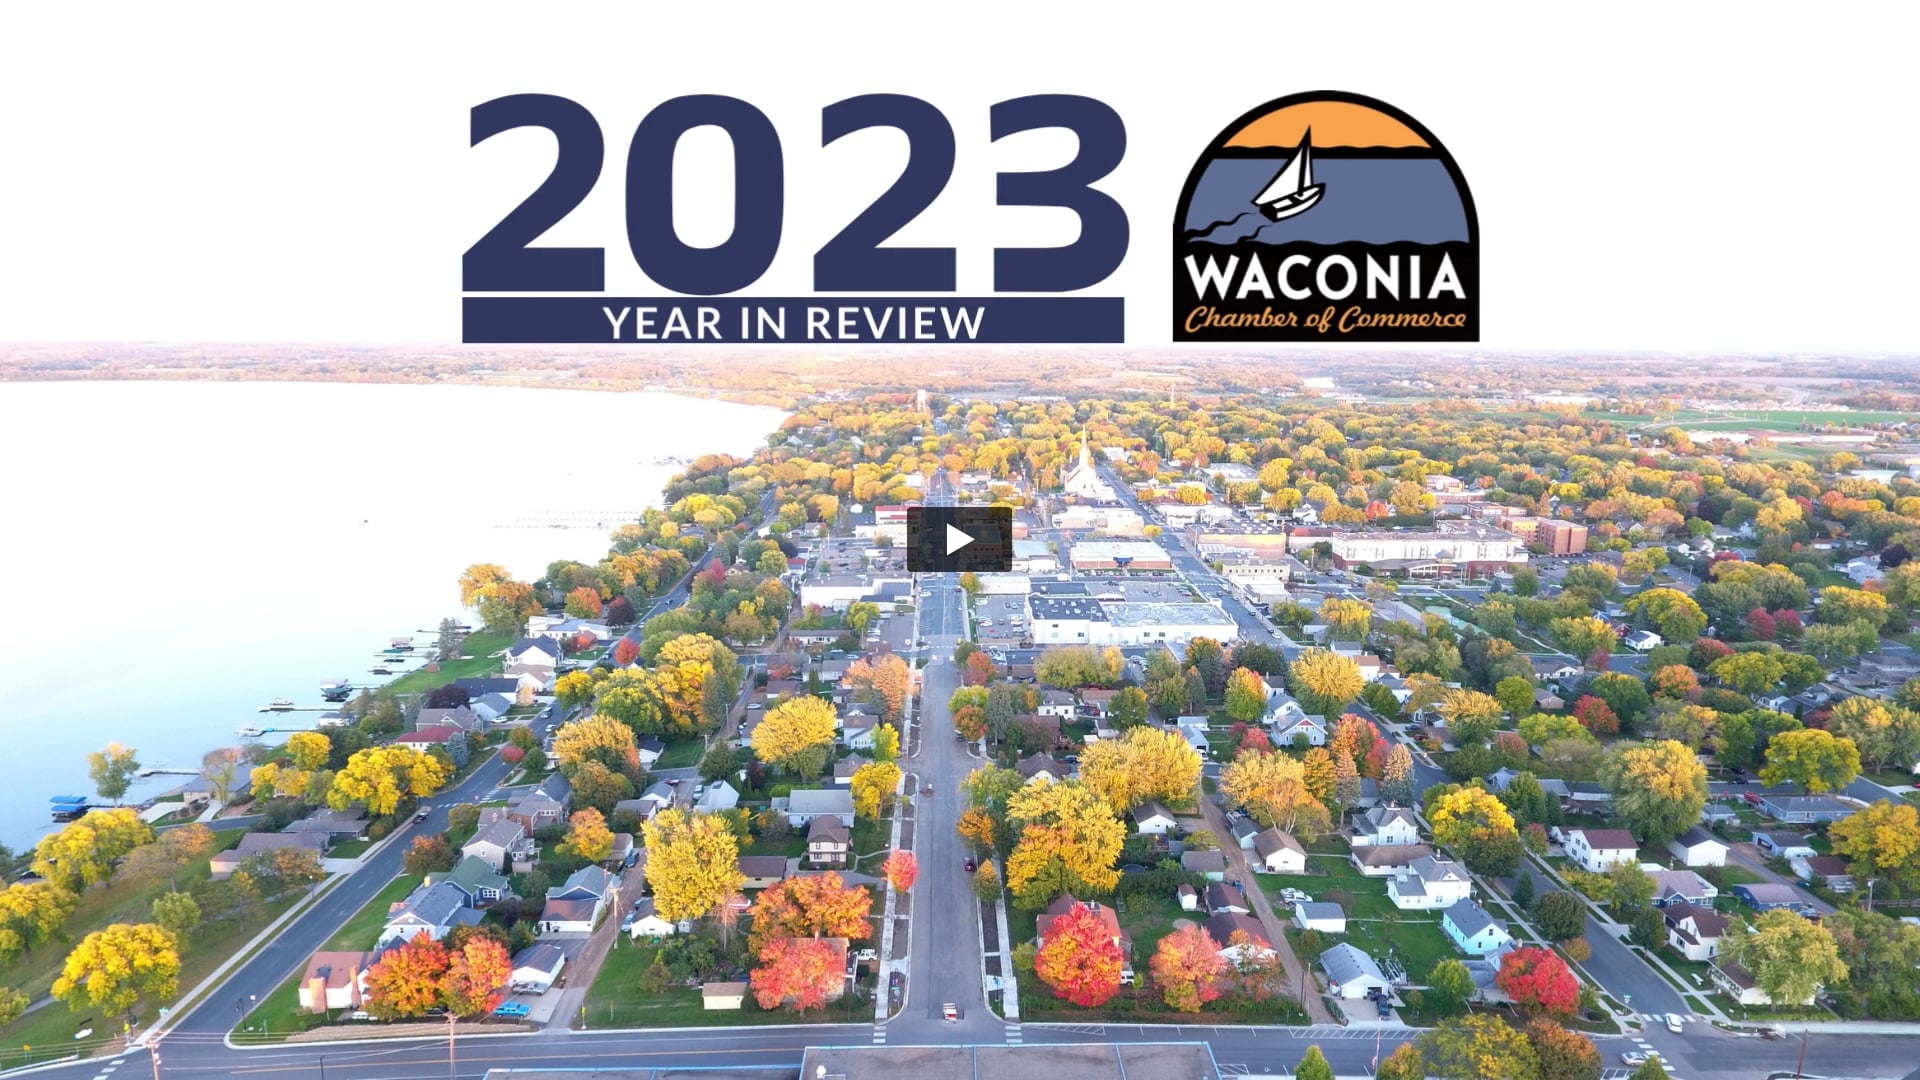 Waconia Area Chamber of Commerce & Visitors Bureau: 2023 in Review